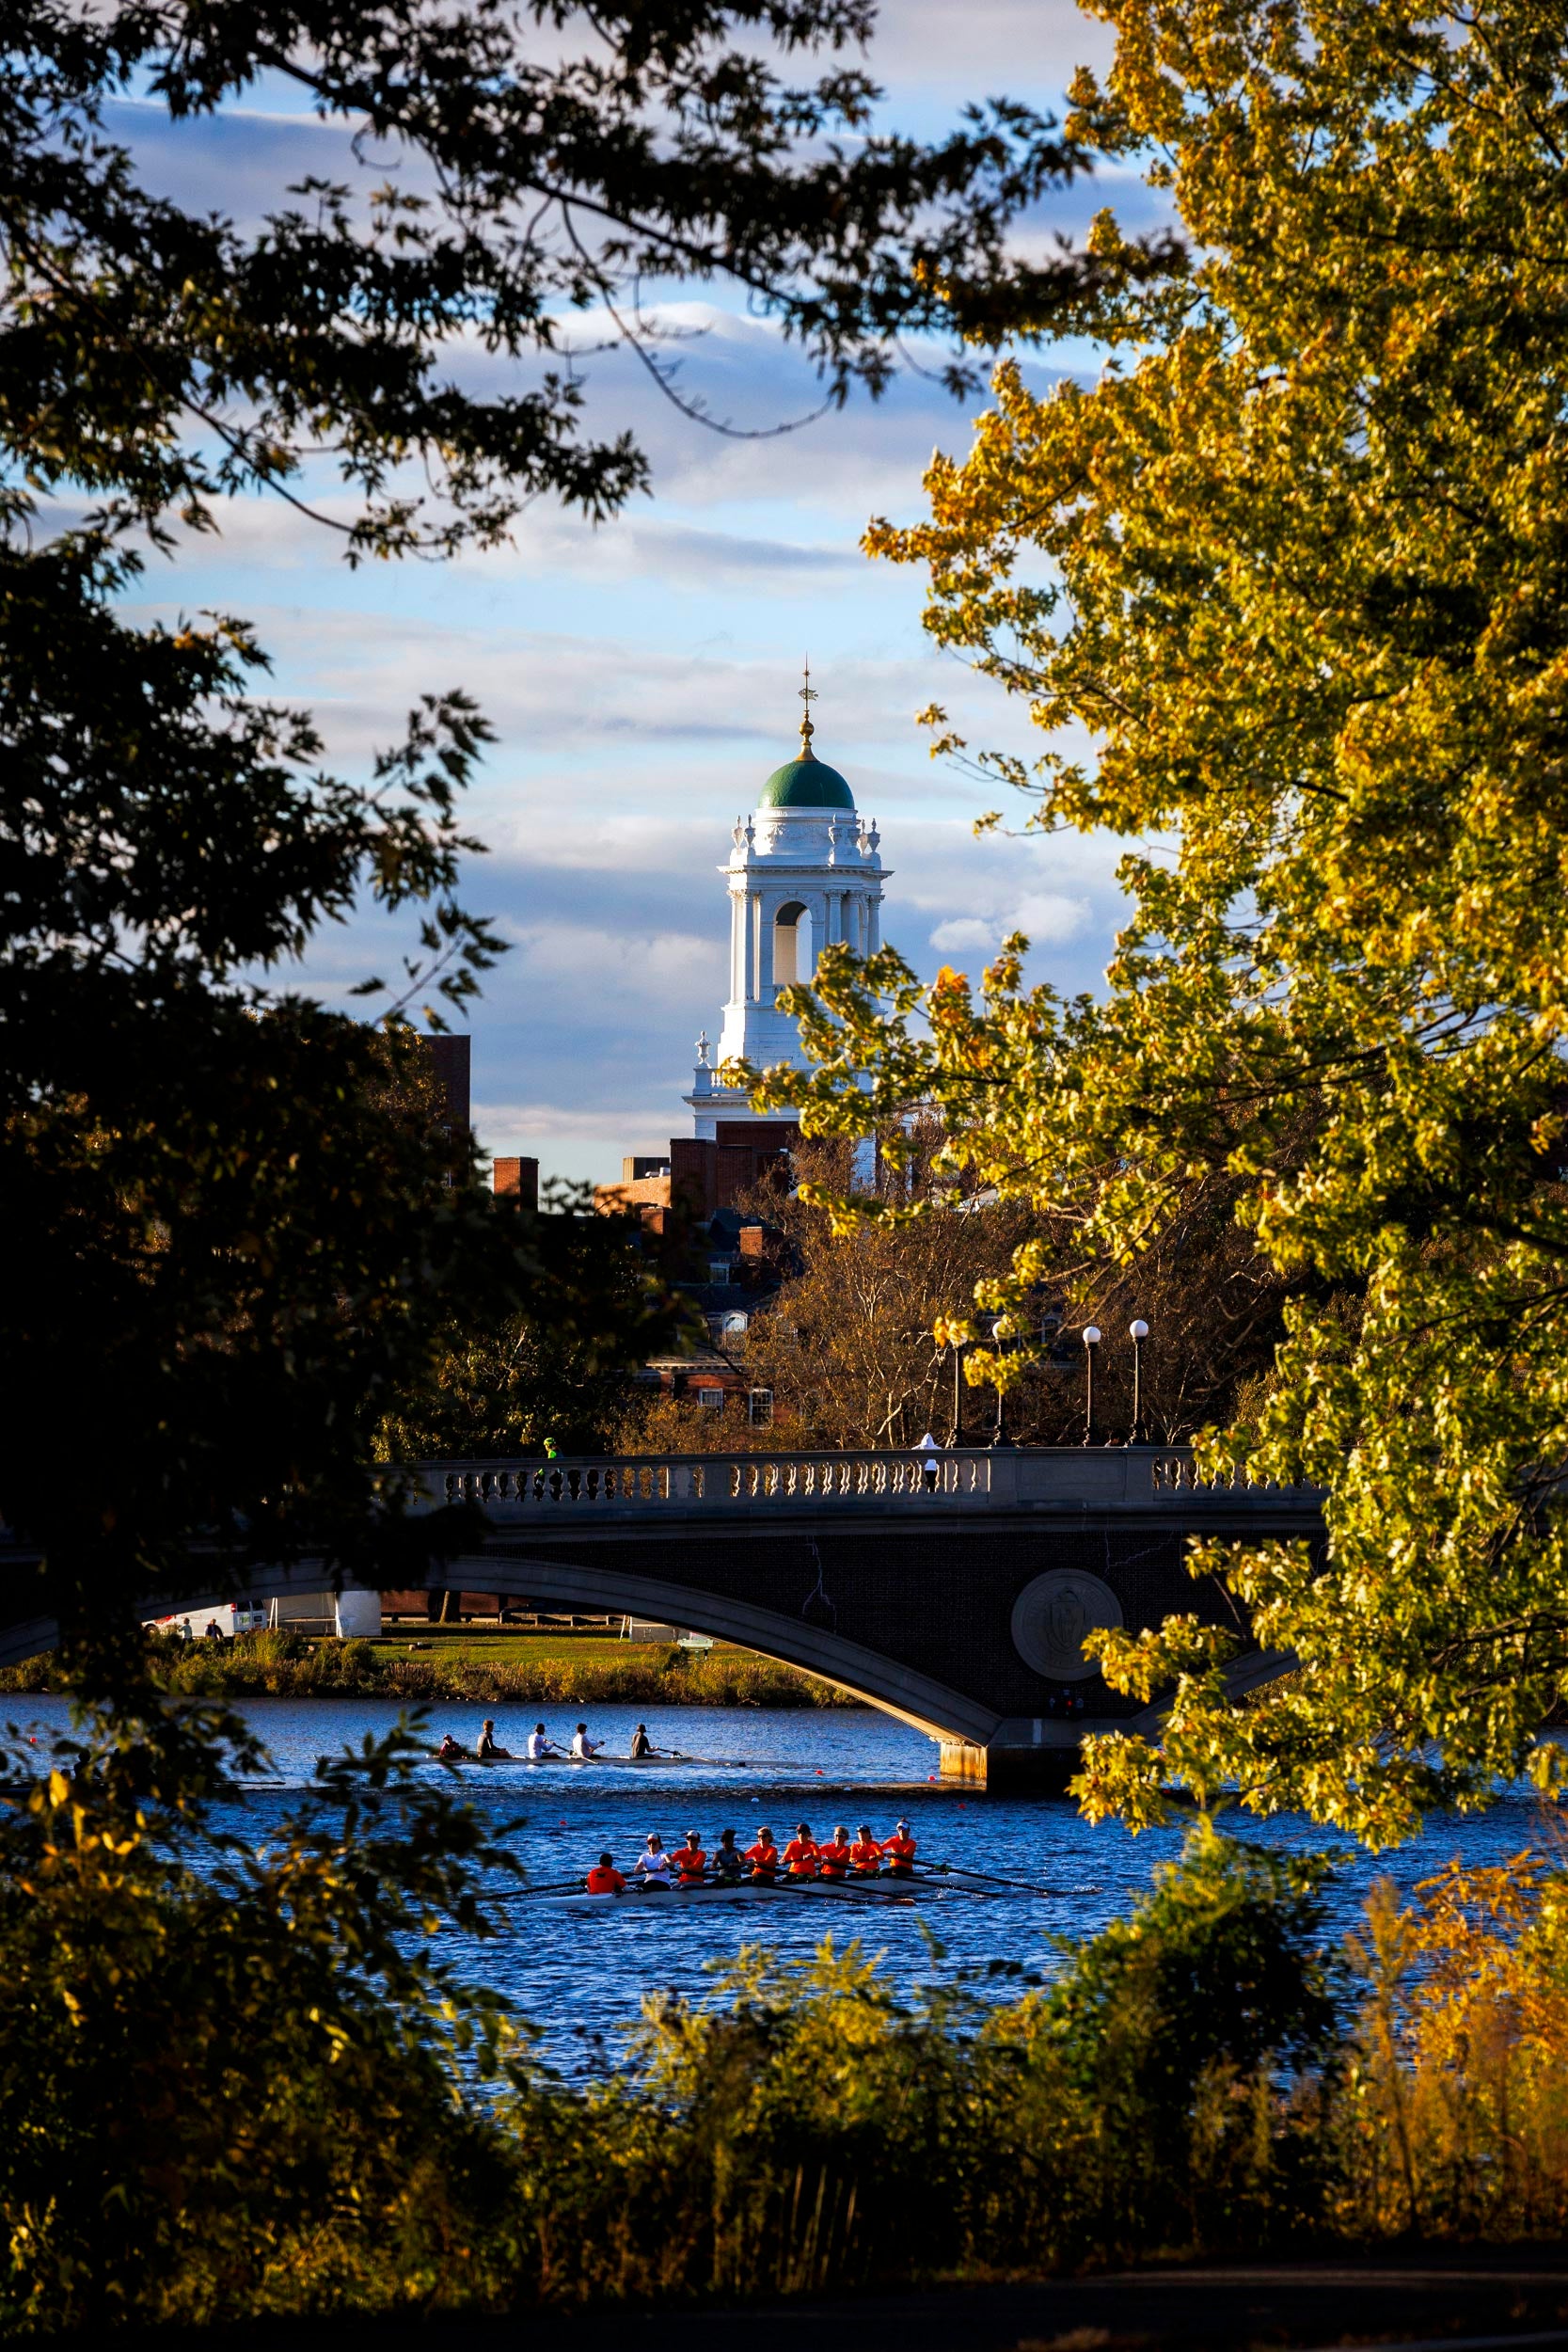 The tower of Eliot House is pictured along the Charles.